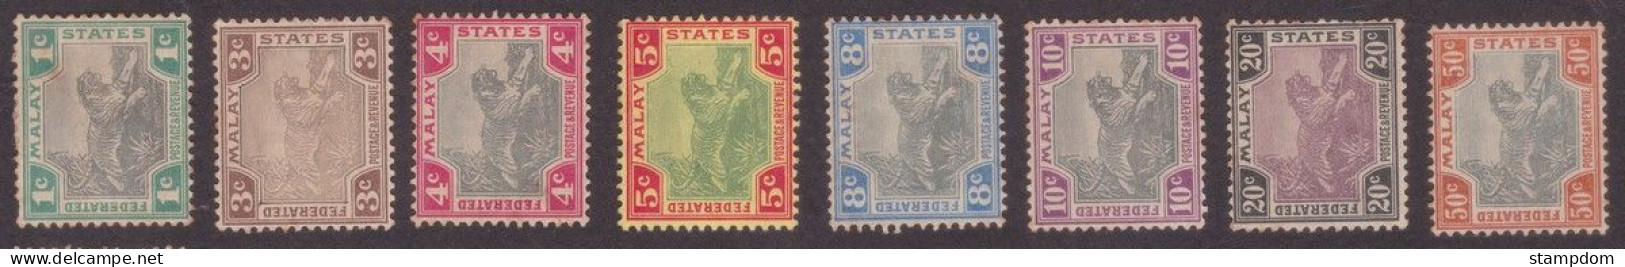 FEDERATED MALAY STATES FMS 1900 1c-50c W.CA Sc#18-25 MH-TONED GUM @TA378 - Federated Malay States